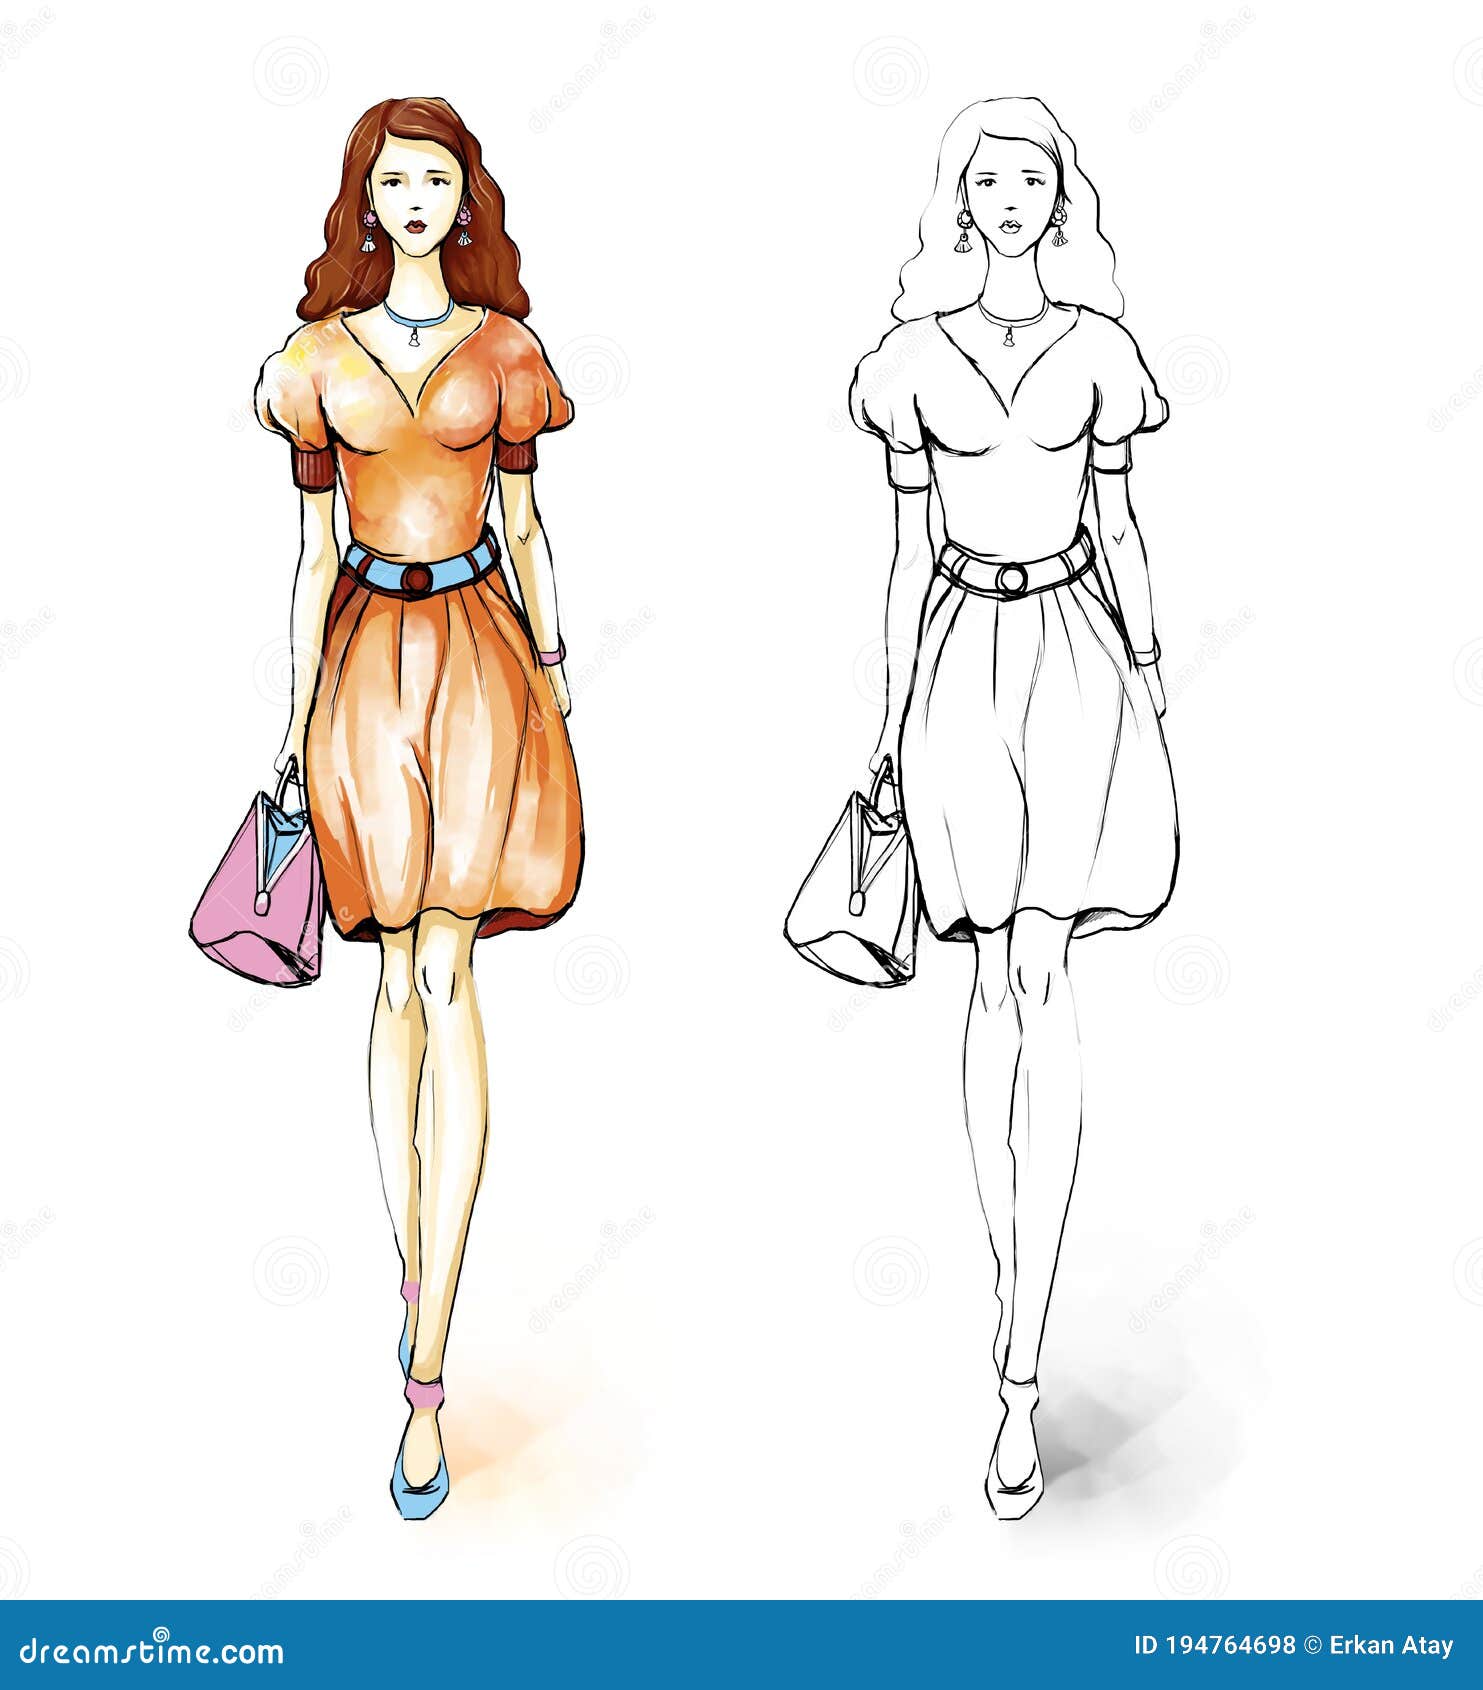 Dress design Images - Search Images on Everypixel-saigonsouth.com.vn